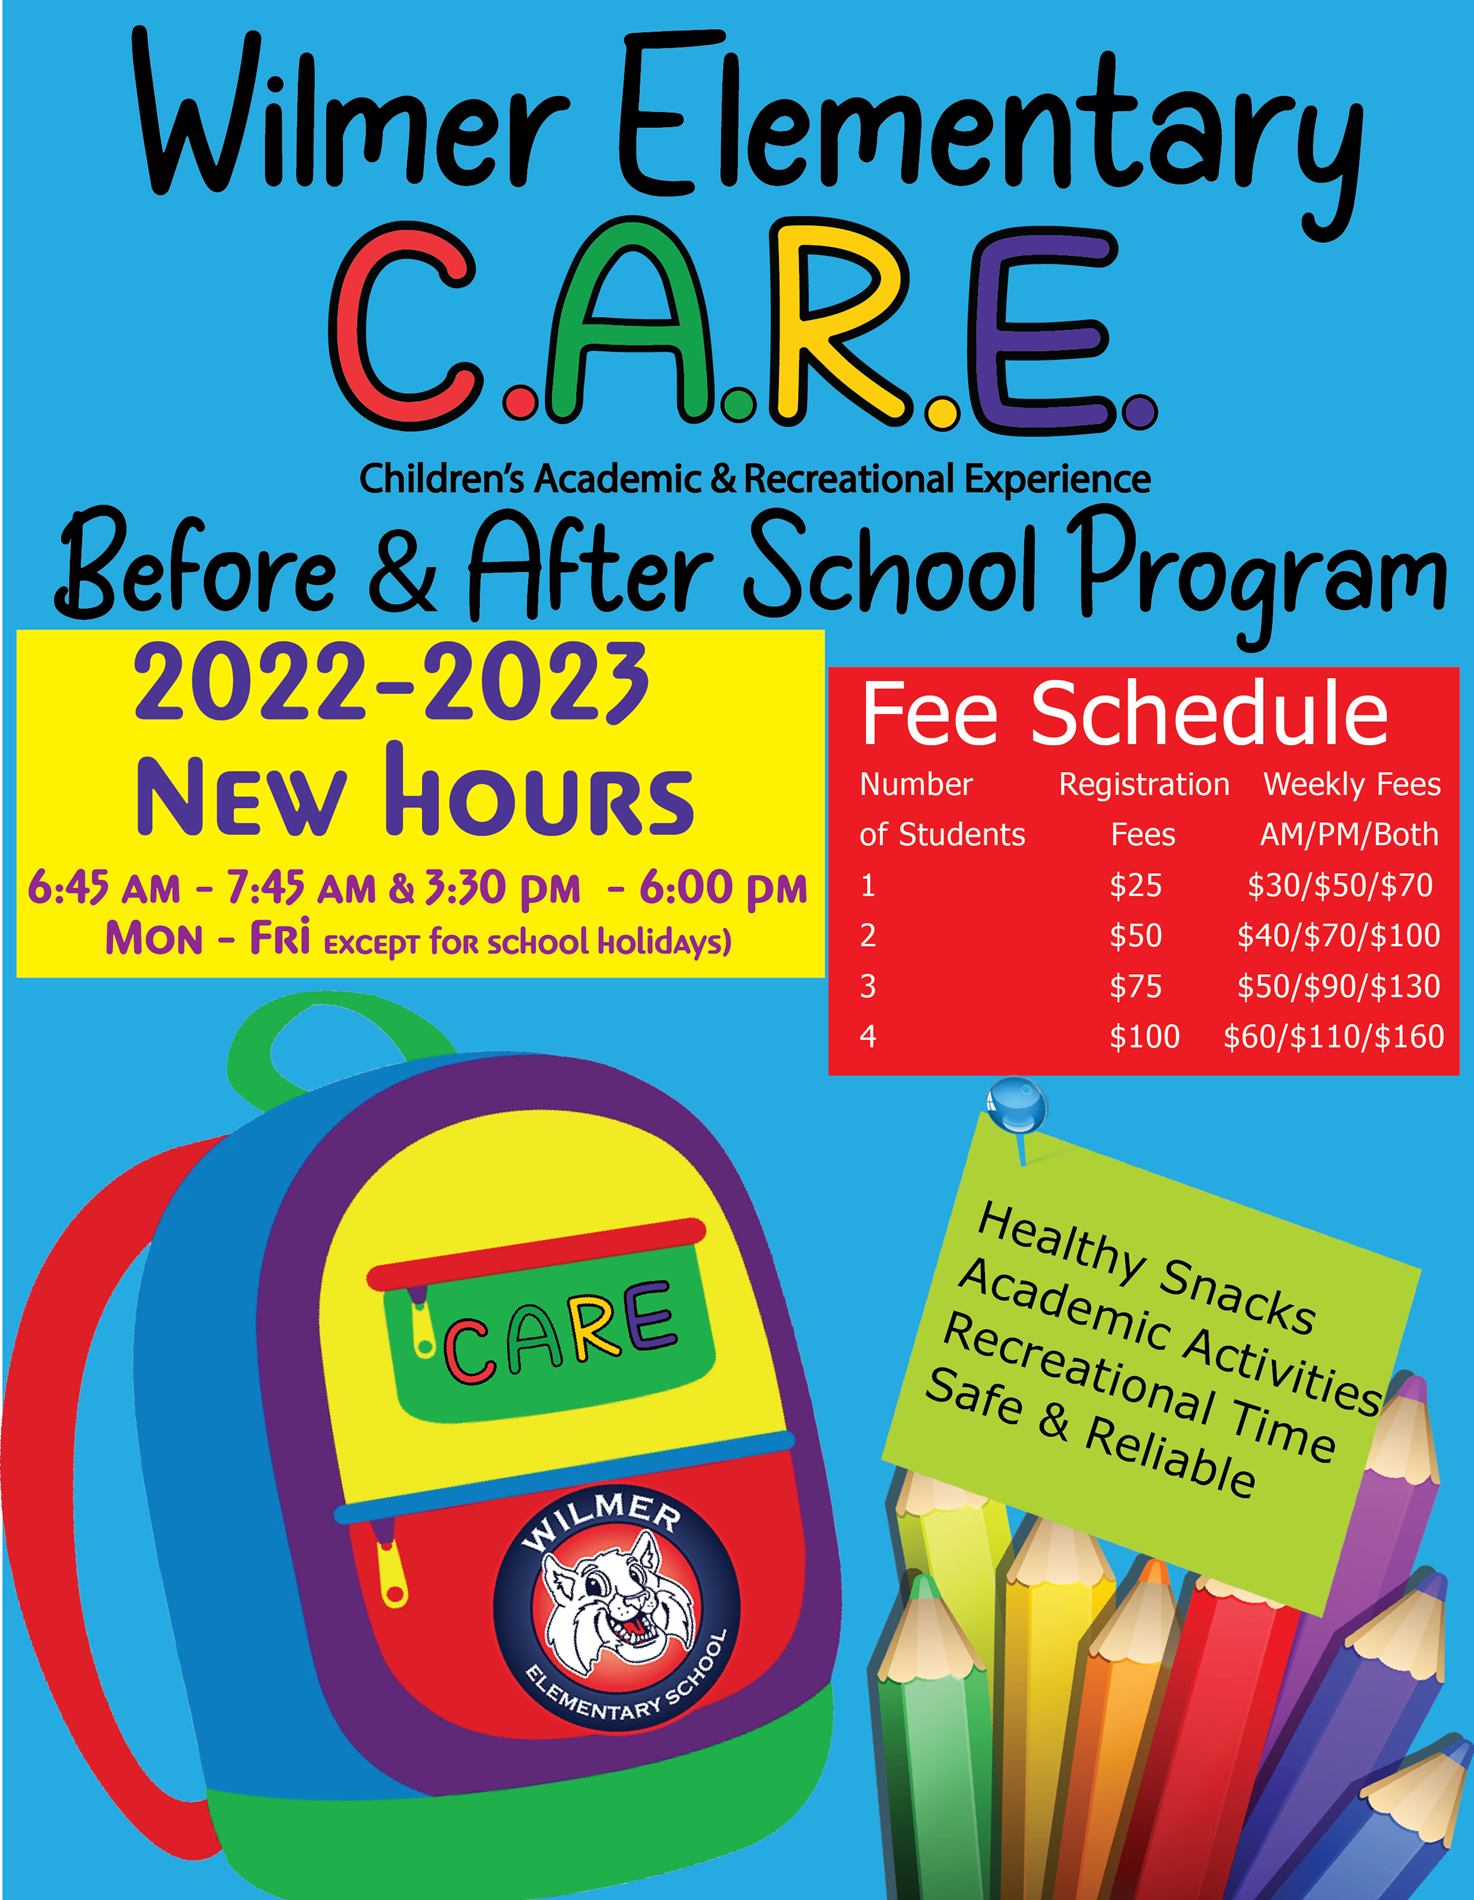 CARE Program Information with prices